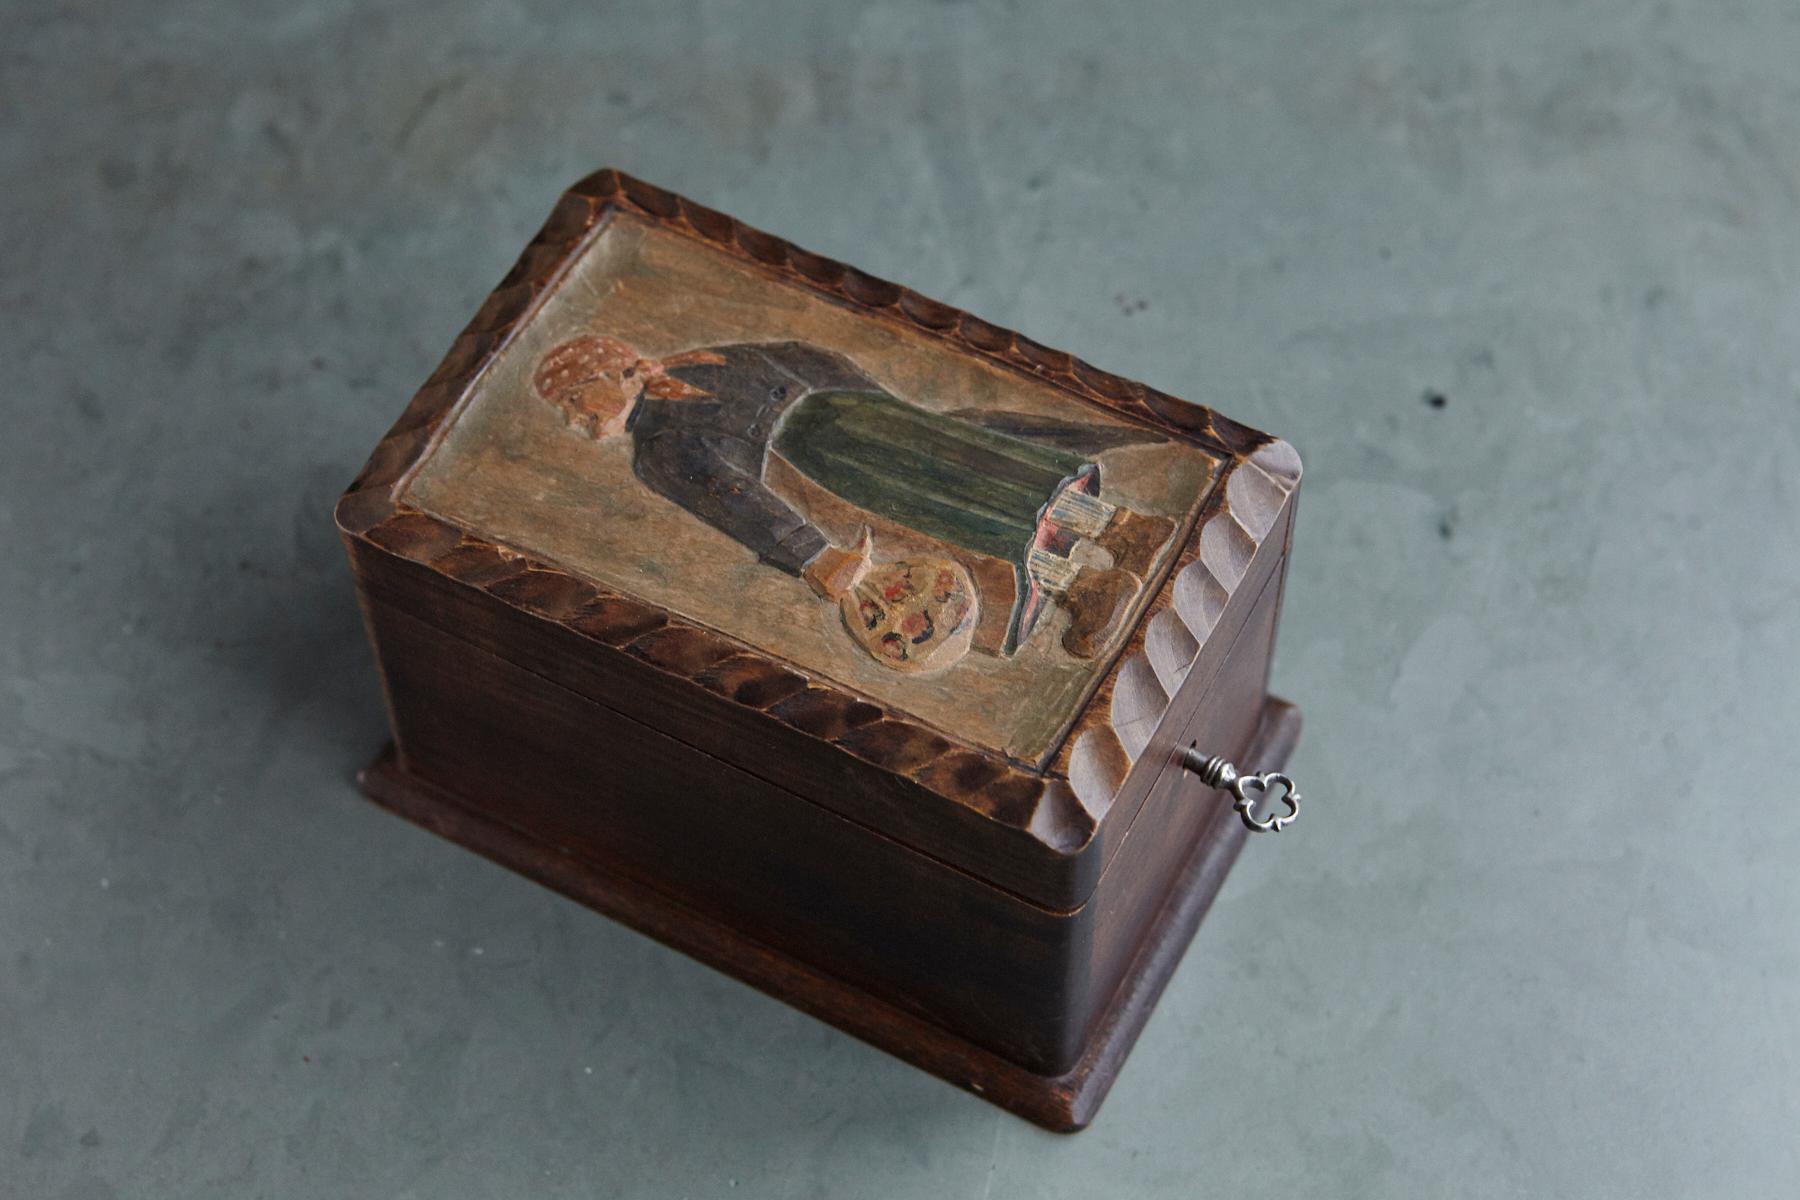 Lovely late 19th century French hand carved and hand painted wooden box with a hinged top depicting a farmer. The box has a functioning key.
 